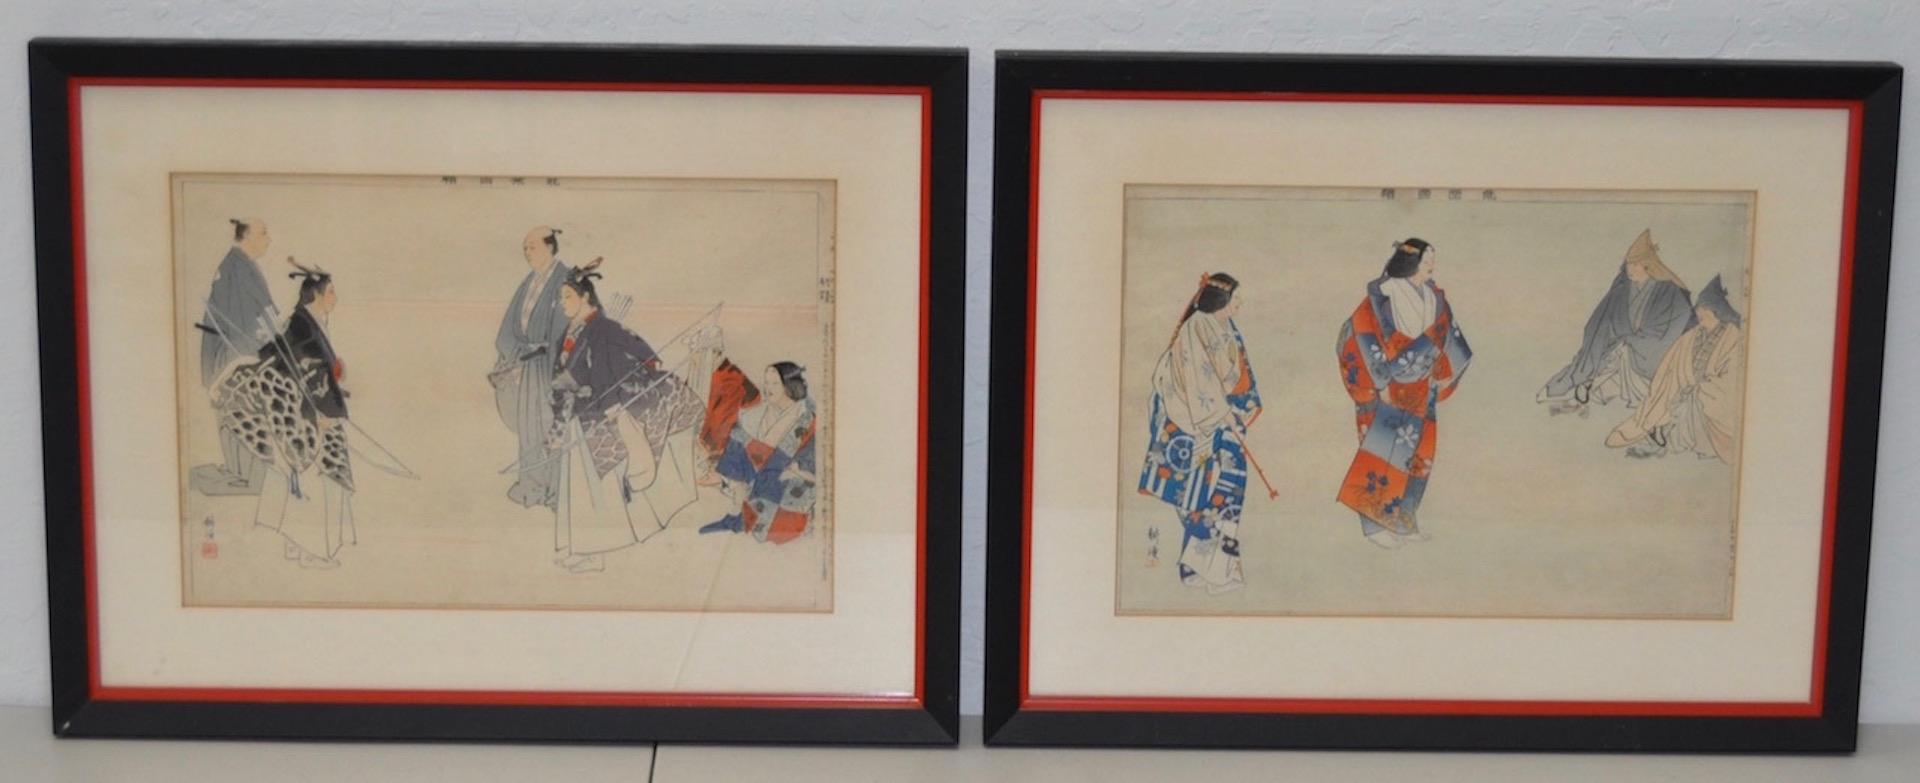 Fine pair of 19th century Japanese woodblock prints.

A pair of sporting scenes. One of them is Archery.

The prints have strong color and are in beautiful frames.

The frames measure approximately 14" x 20. The prints are approximately 16" x 10"